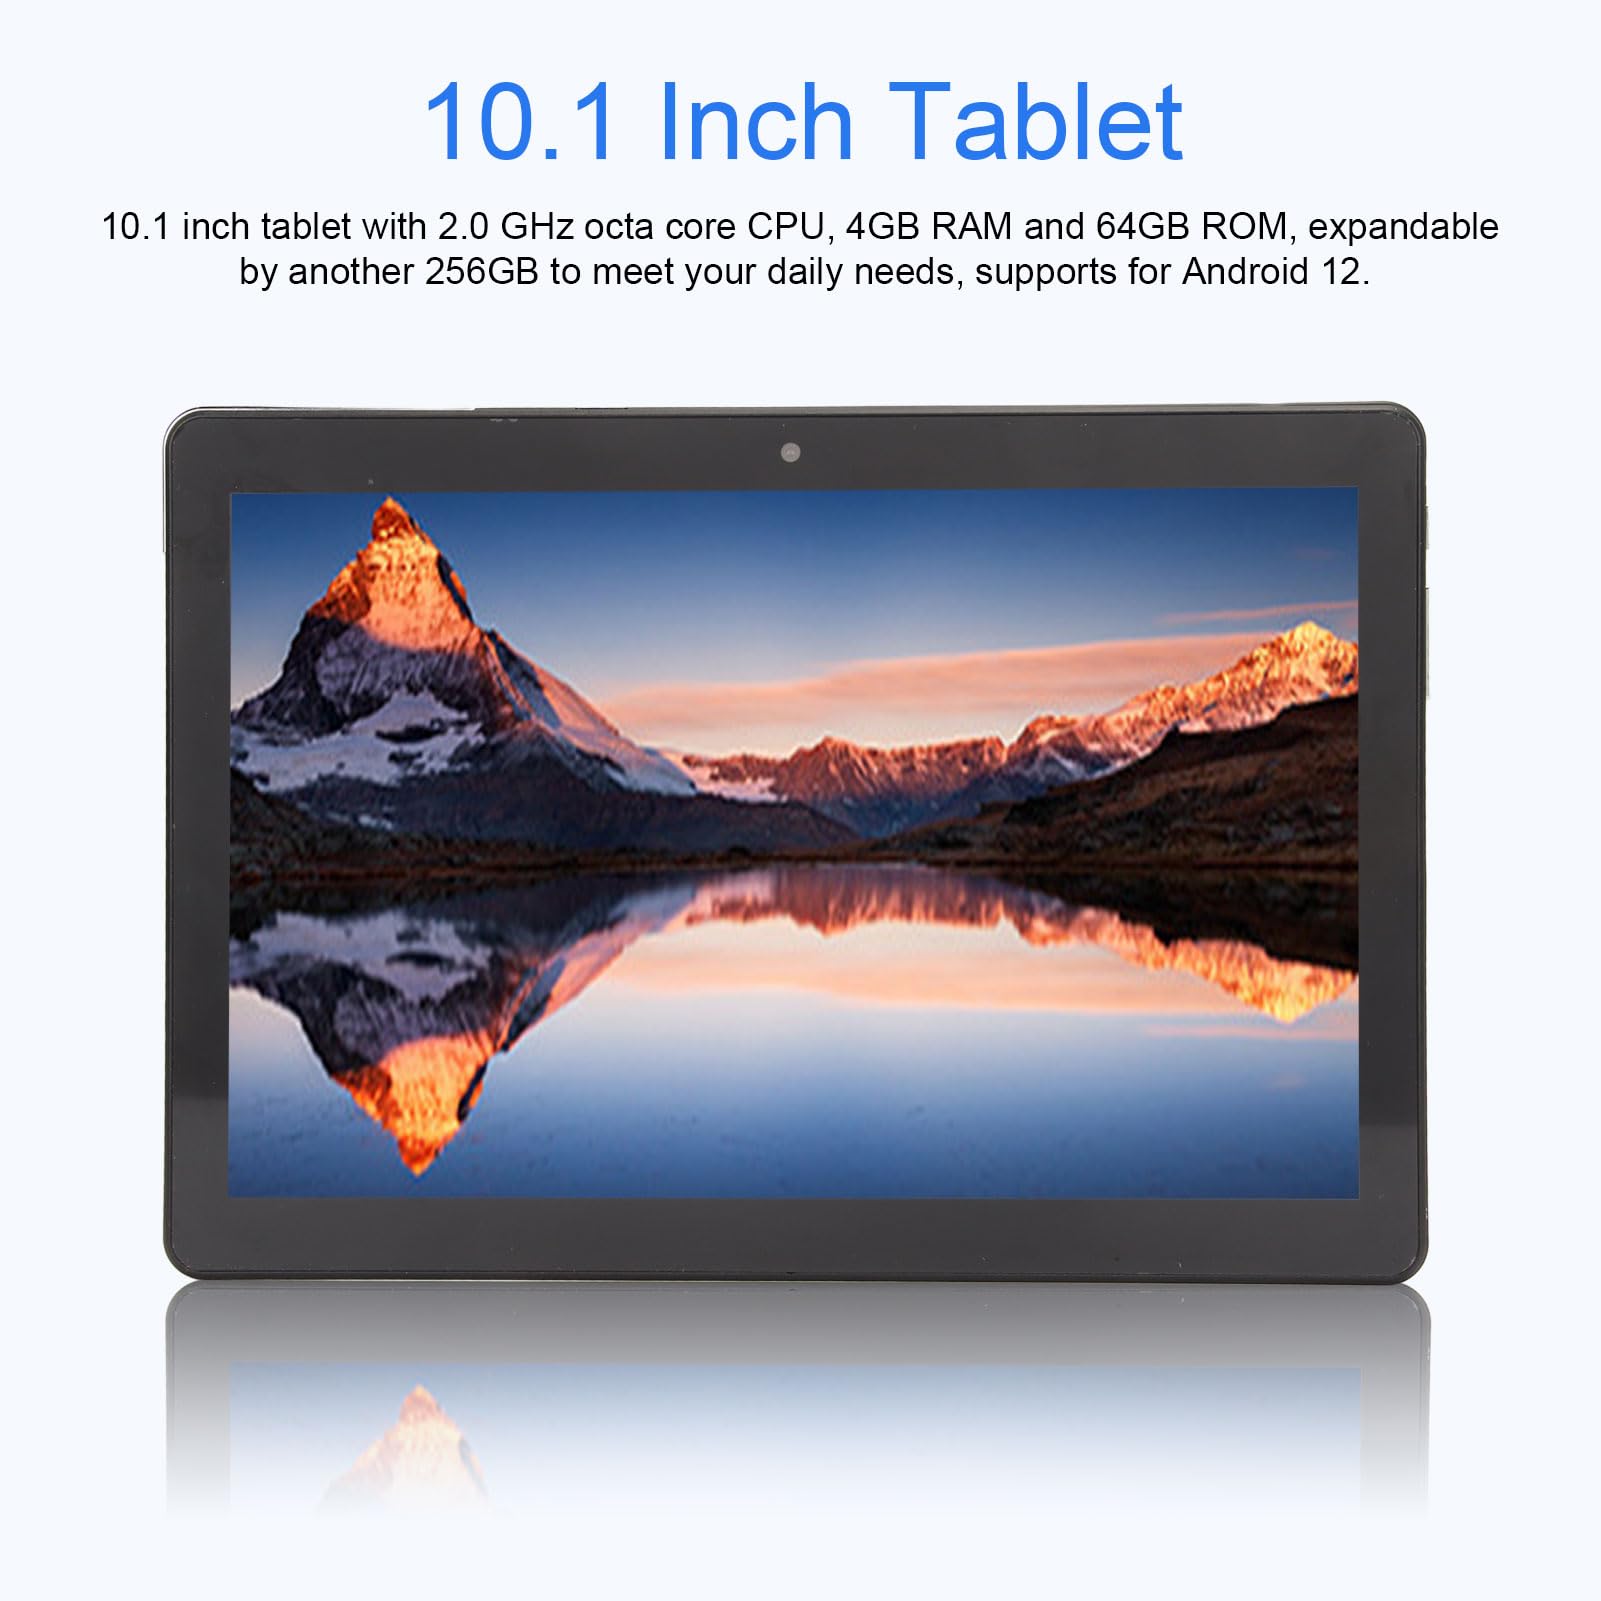 Gugxiom 10.1 Inch Tablet, IPS HD Display, 1920x1200 Resolution, 4GB RAM 64GB ROM, Octa Core CPU, with Bluetooth Headset, Dual Camera, for Work Study Home Office (US Plug)